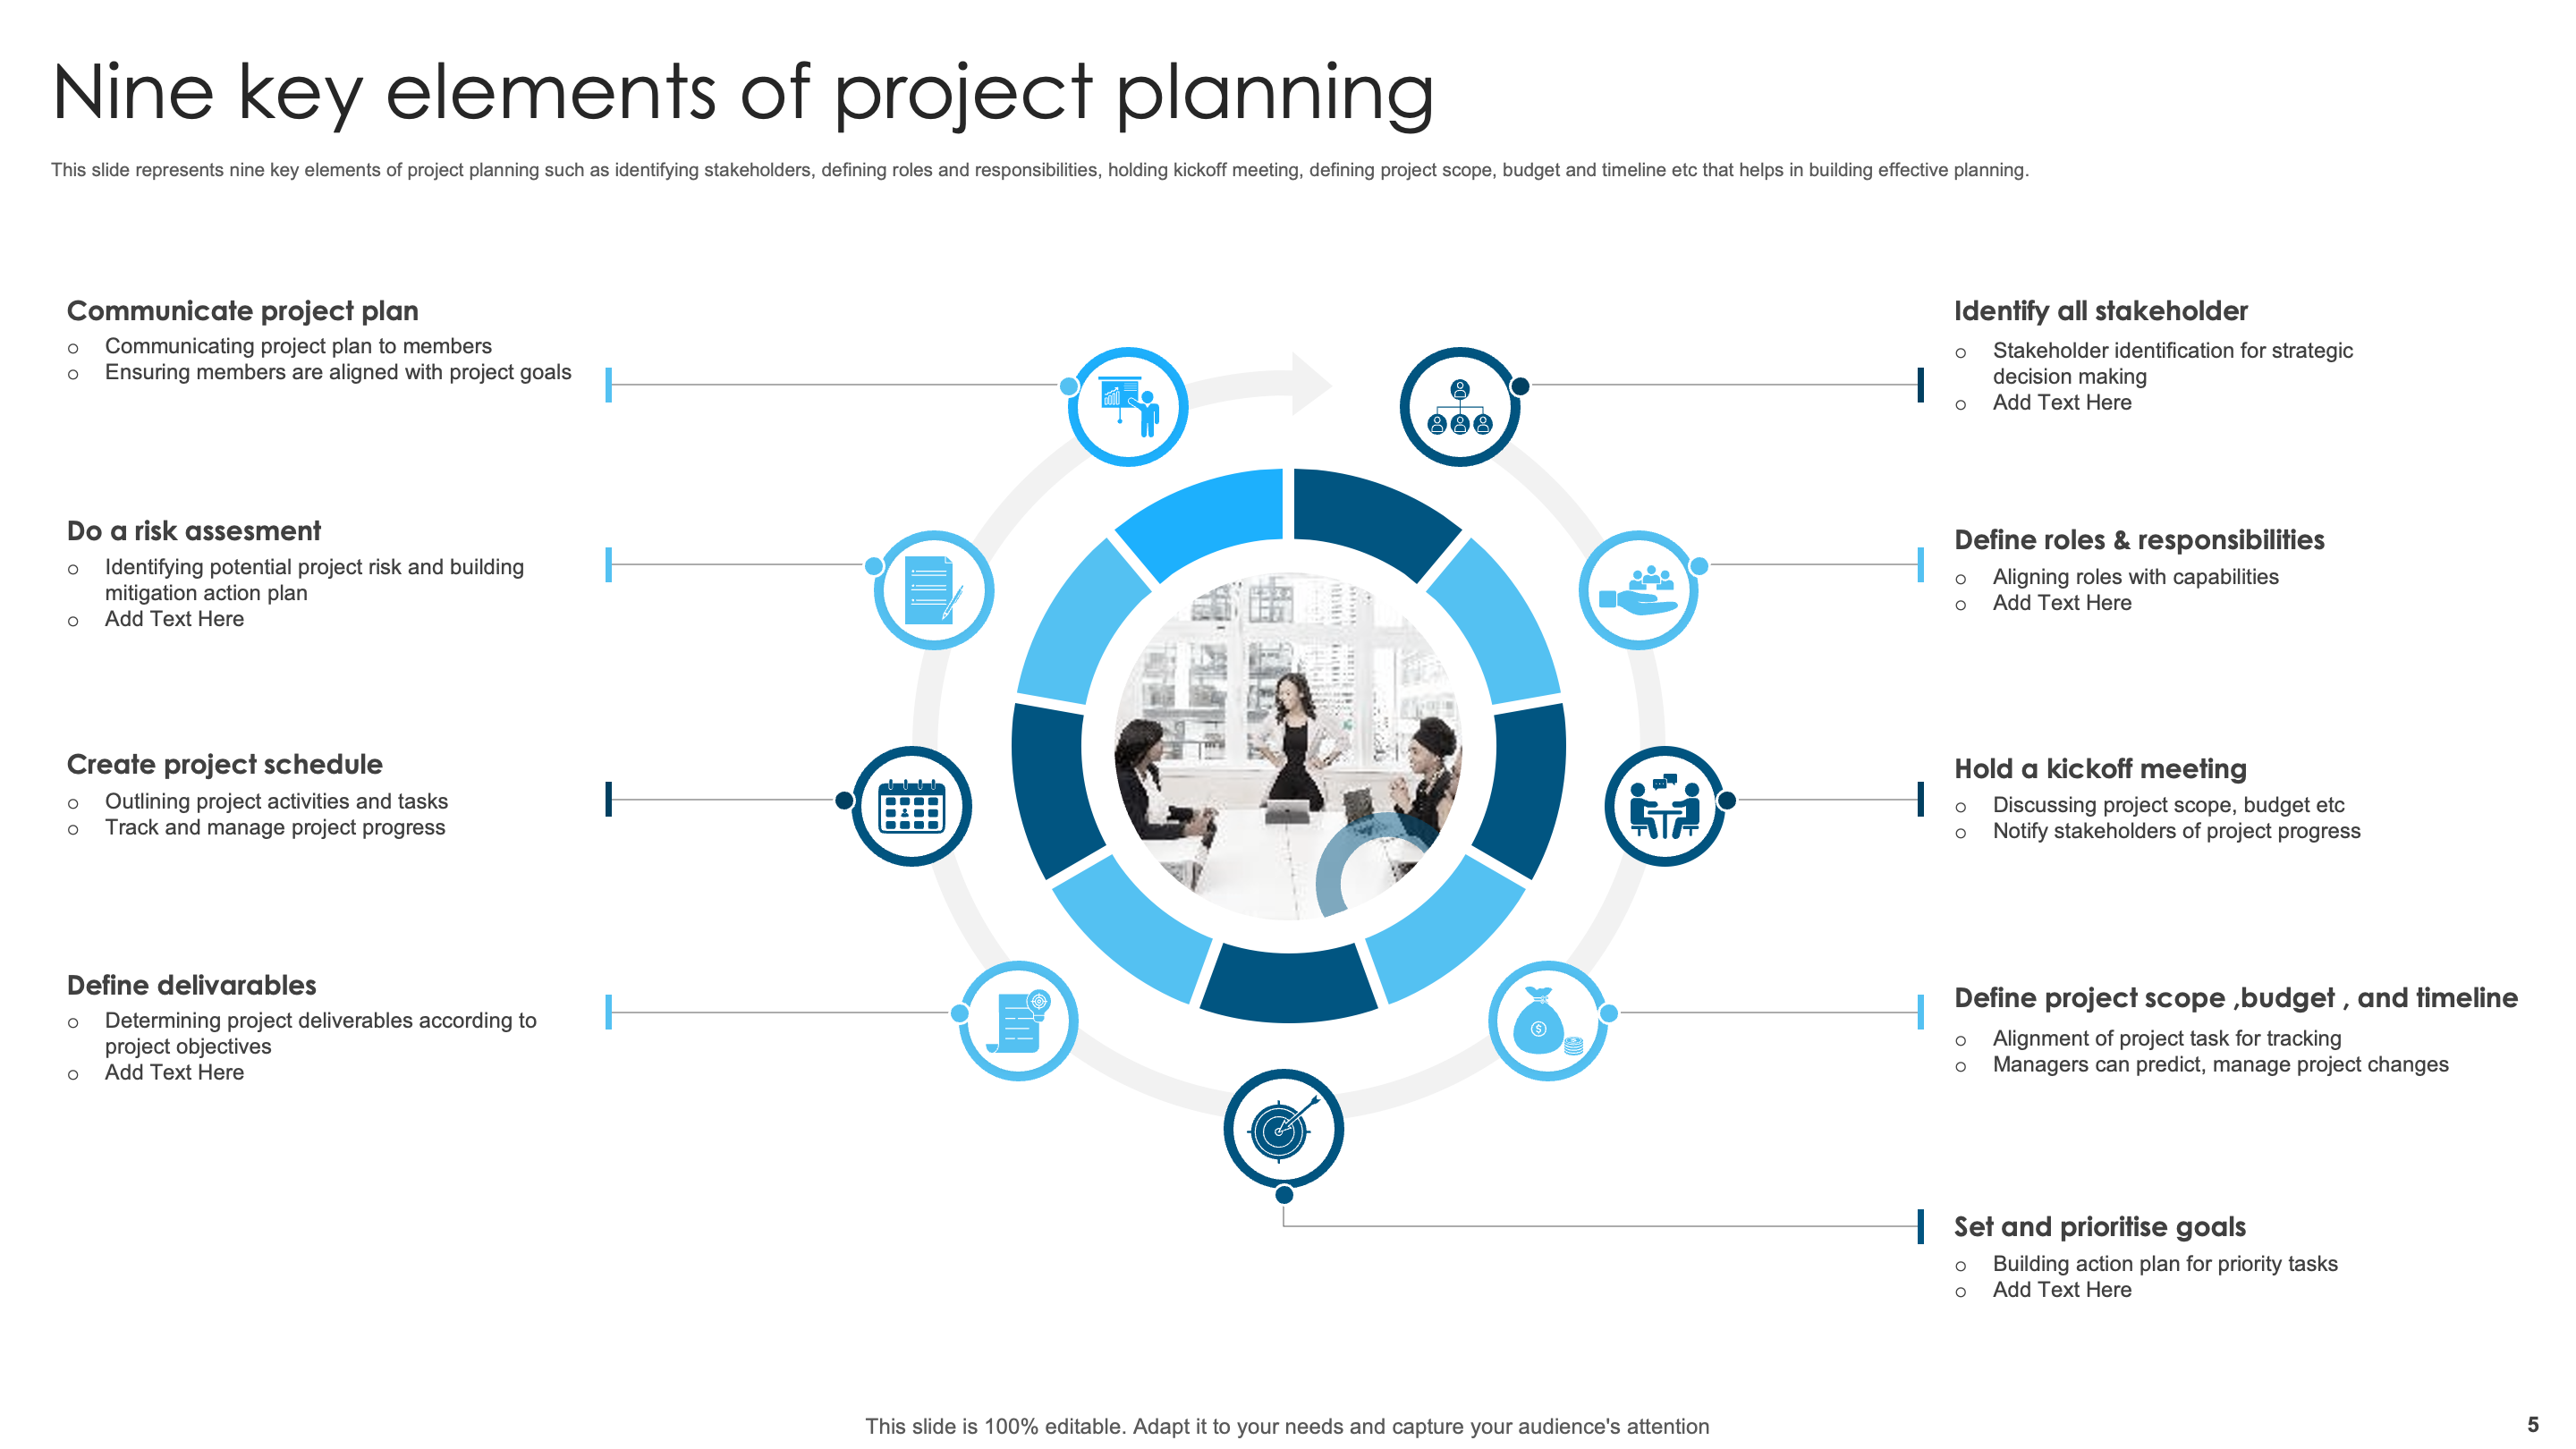 Go Through the Nine Key Elements of Project Planning